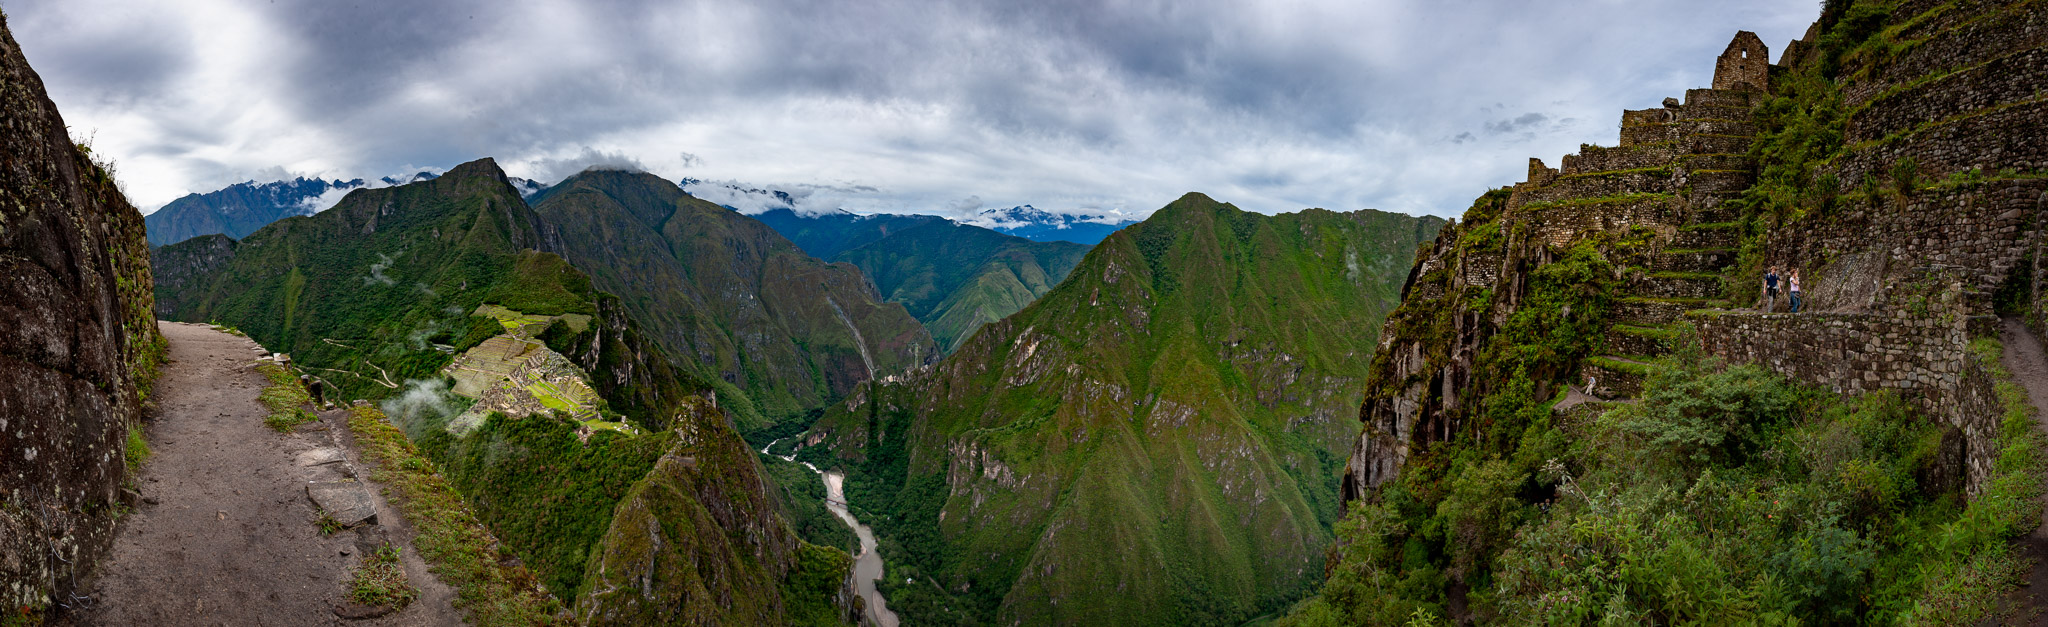 View from from Wayna Picchu